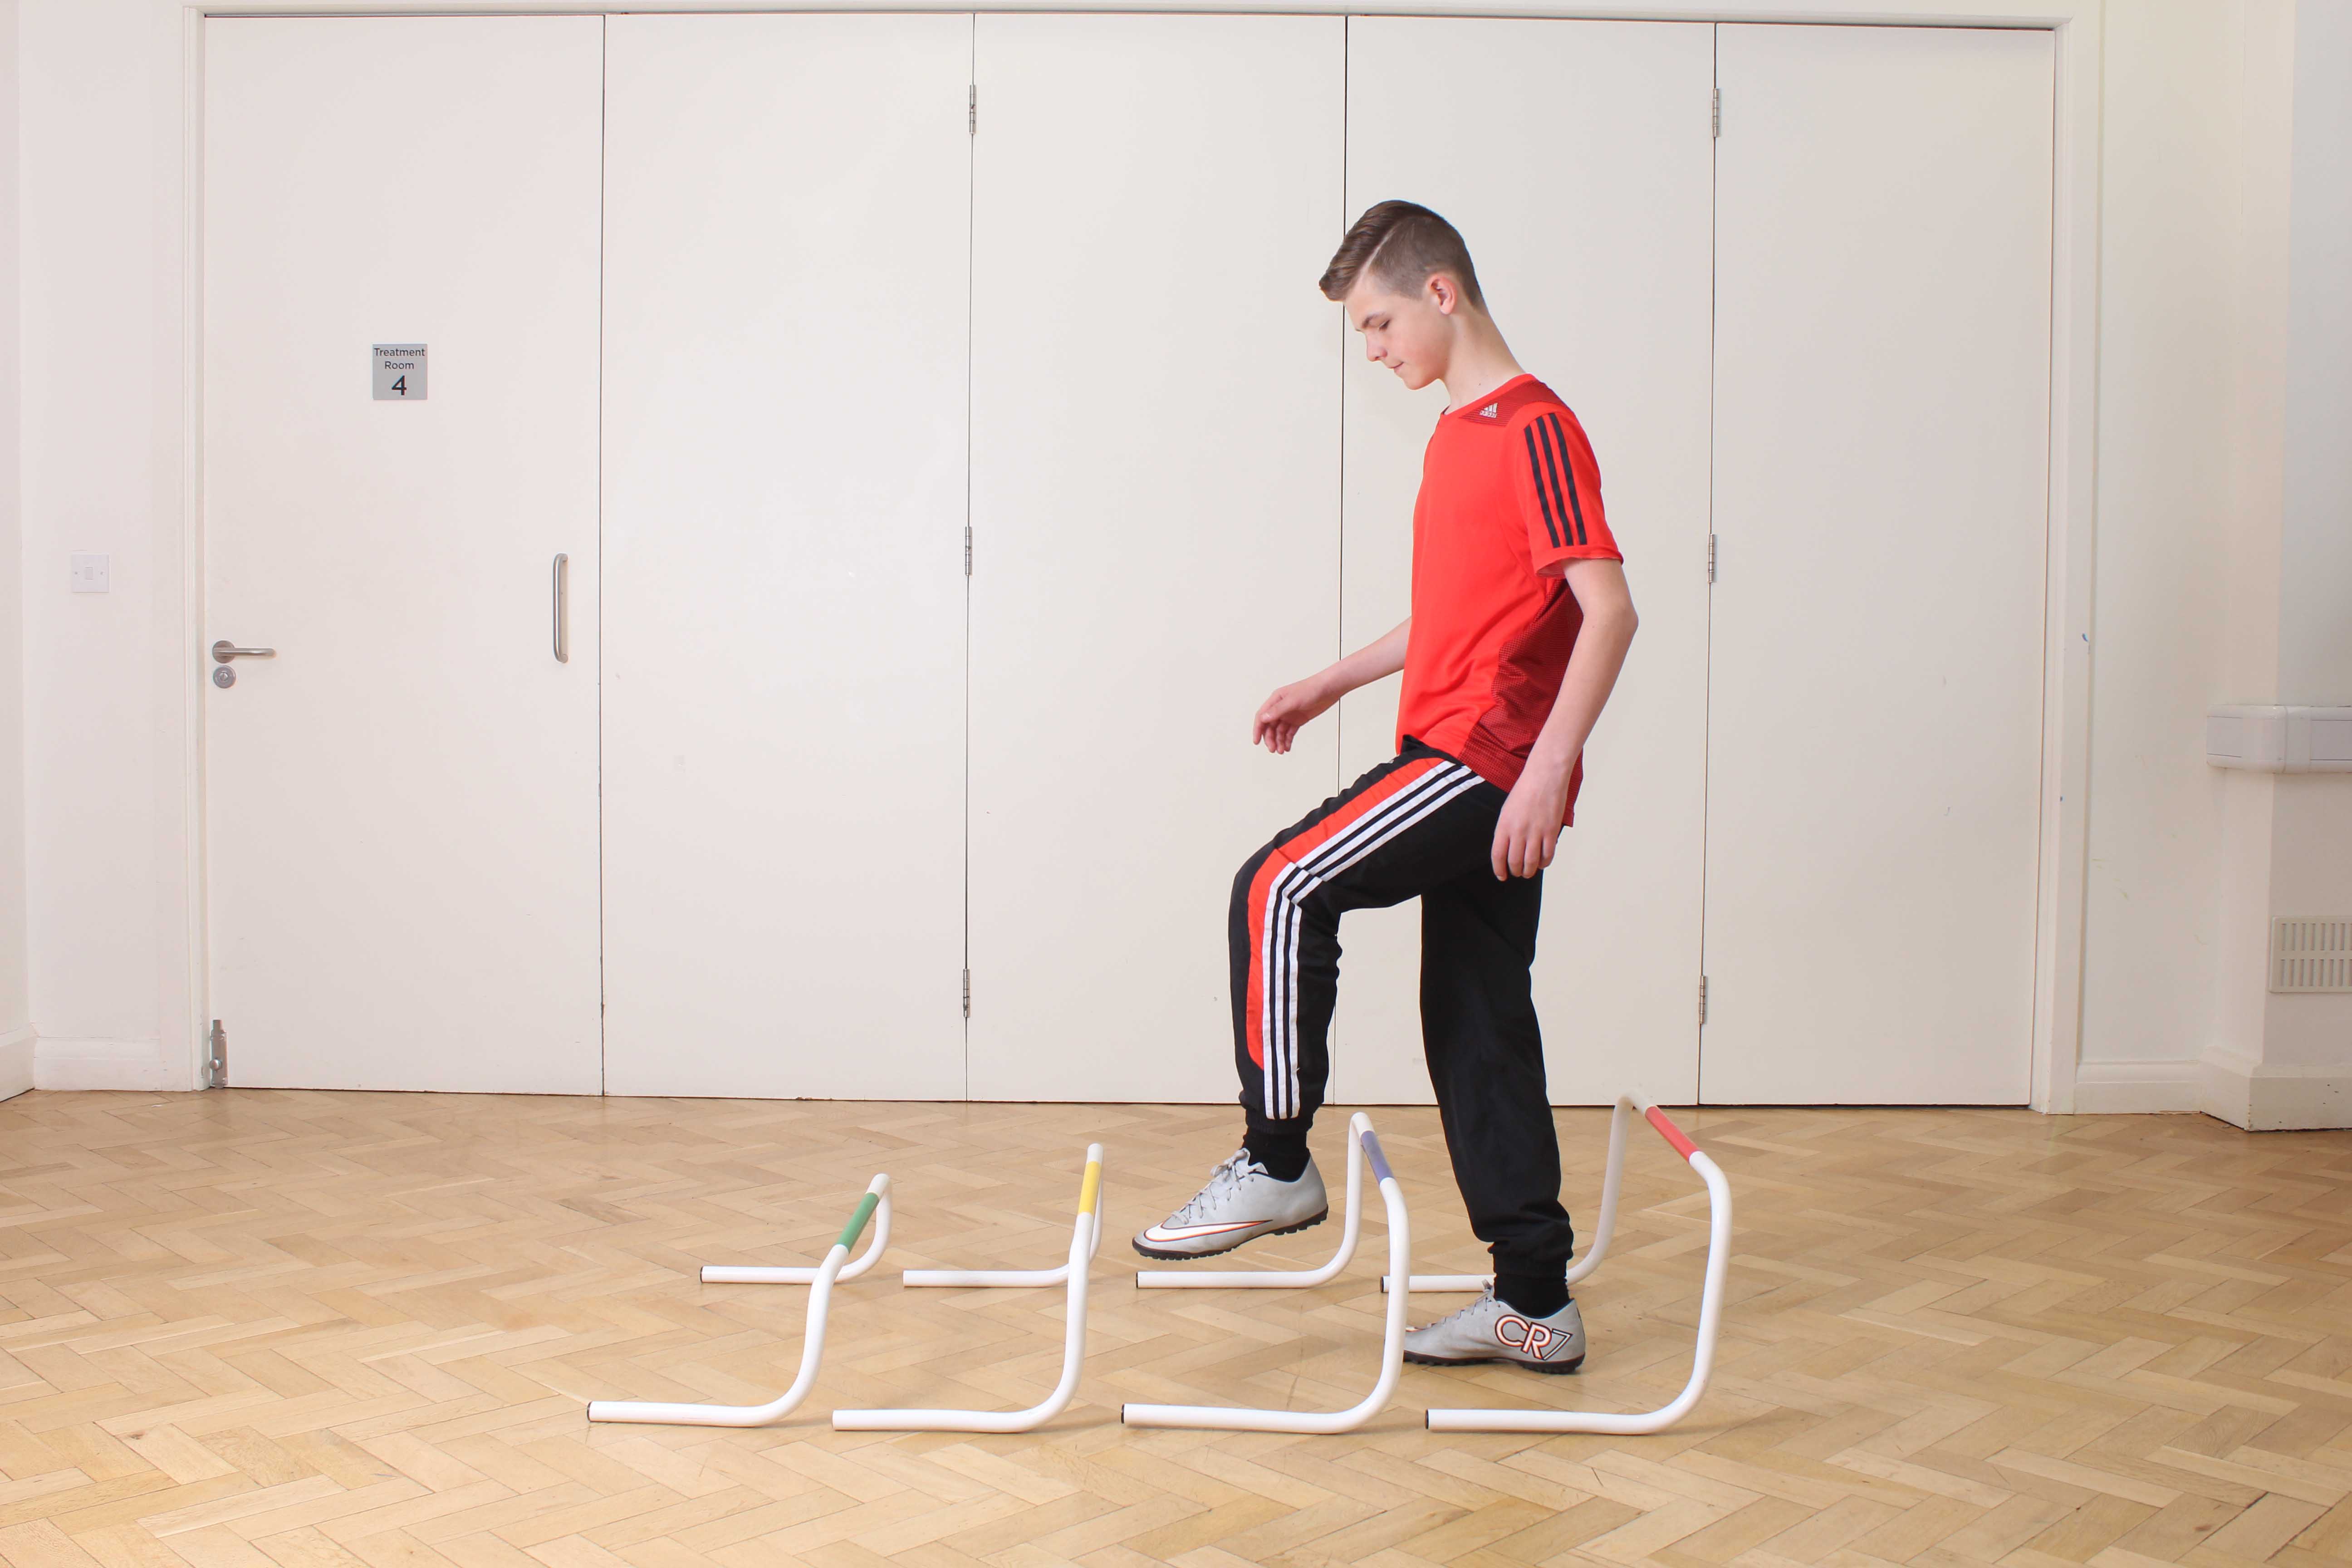 Balance and co-ordination  exercises supervised by a paediatric physiotherapist